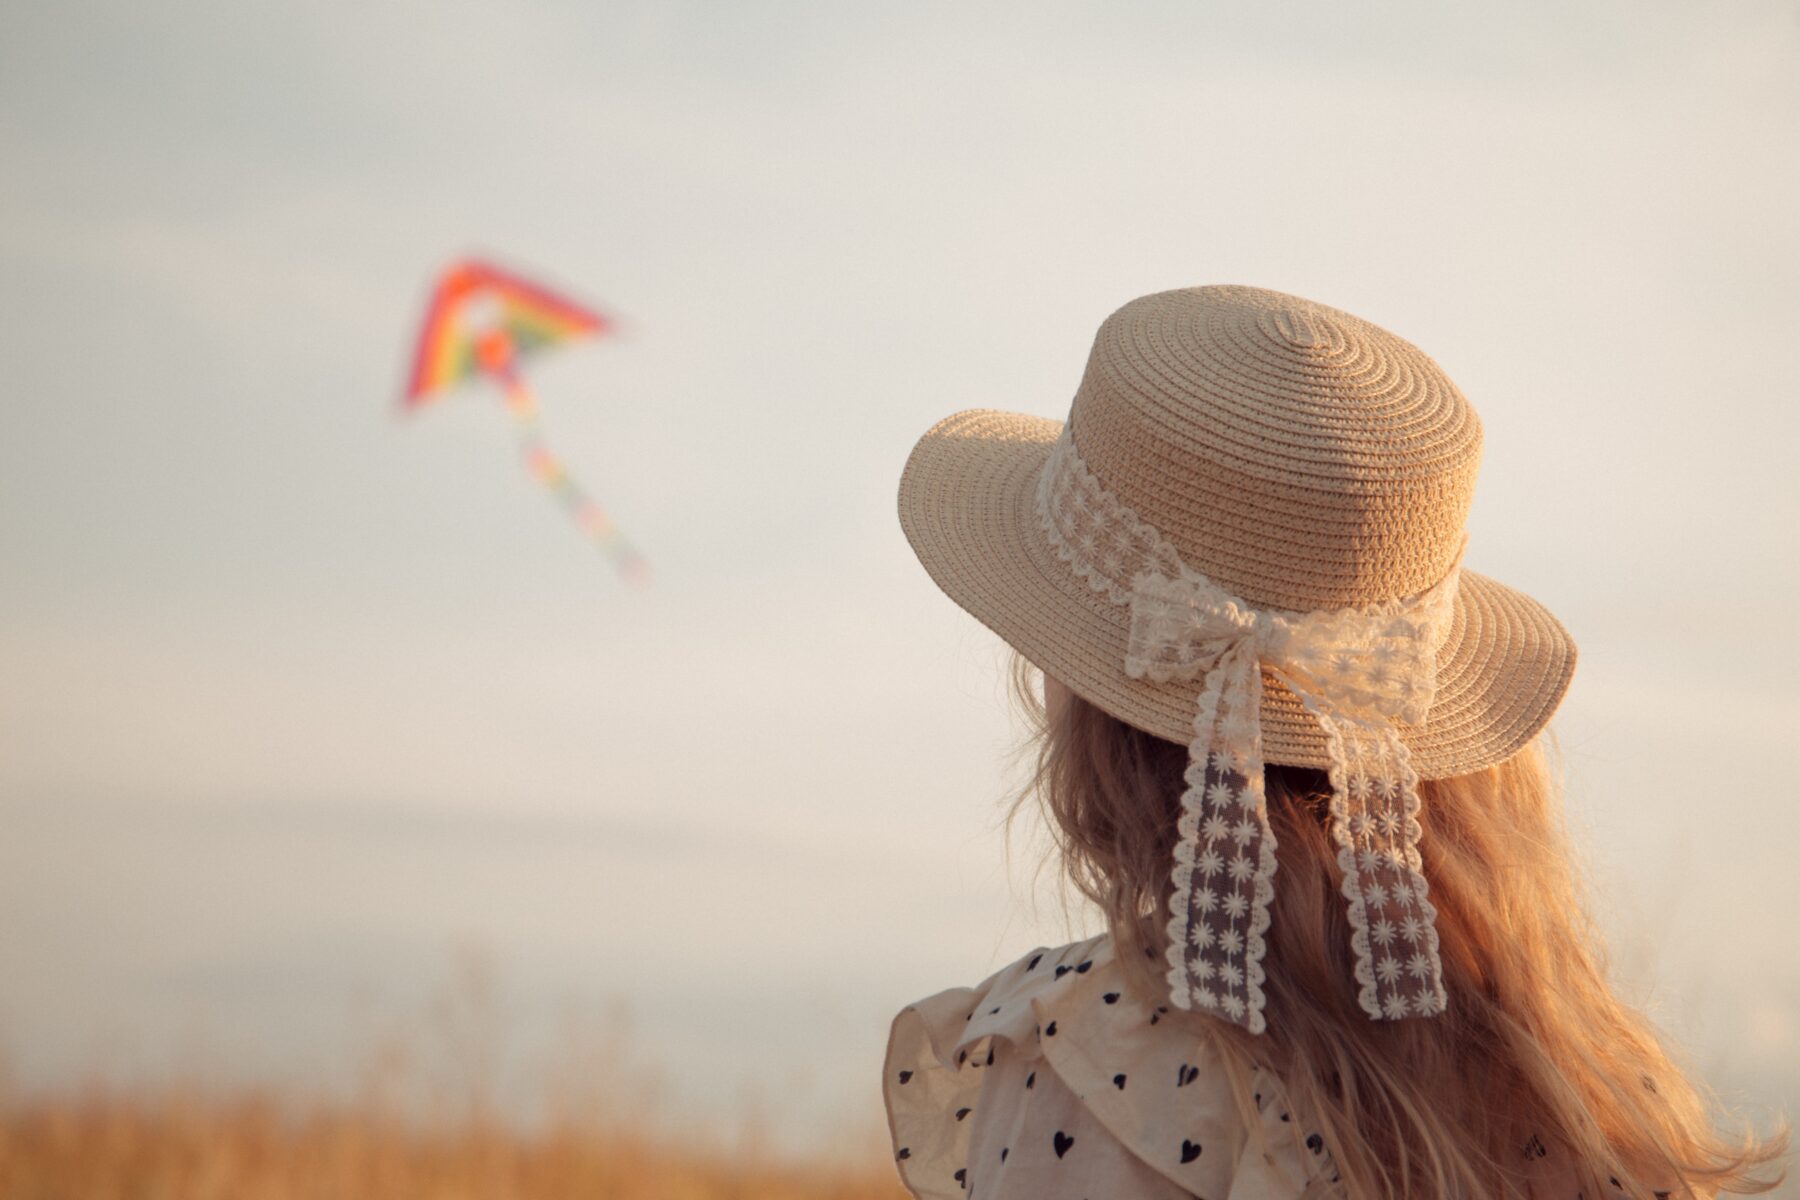 Image shows a girl in a hat with long blonde hair. She faces away from the camera, looking at a kite.